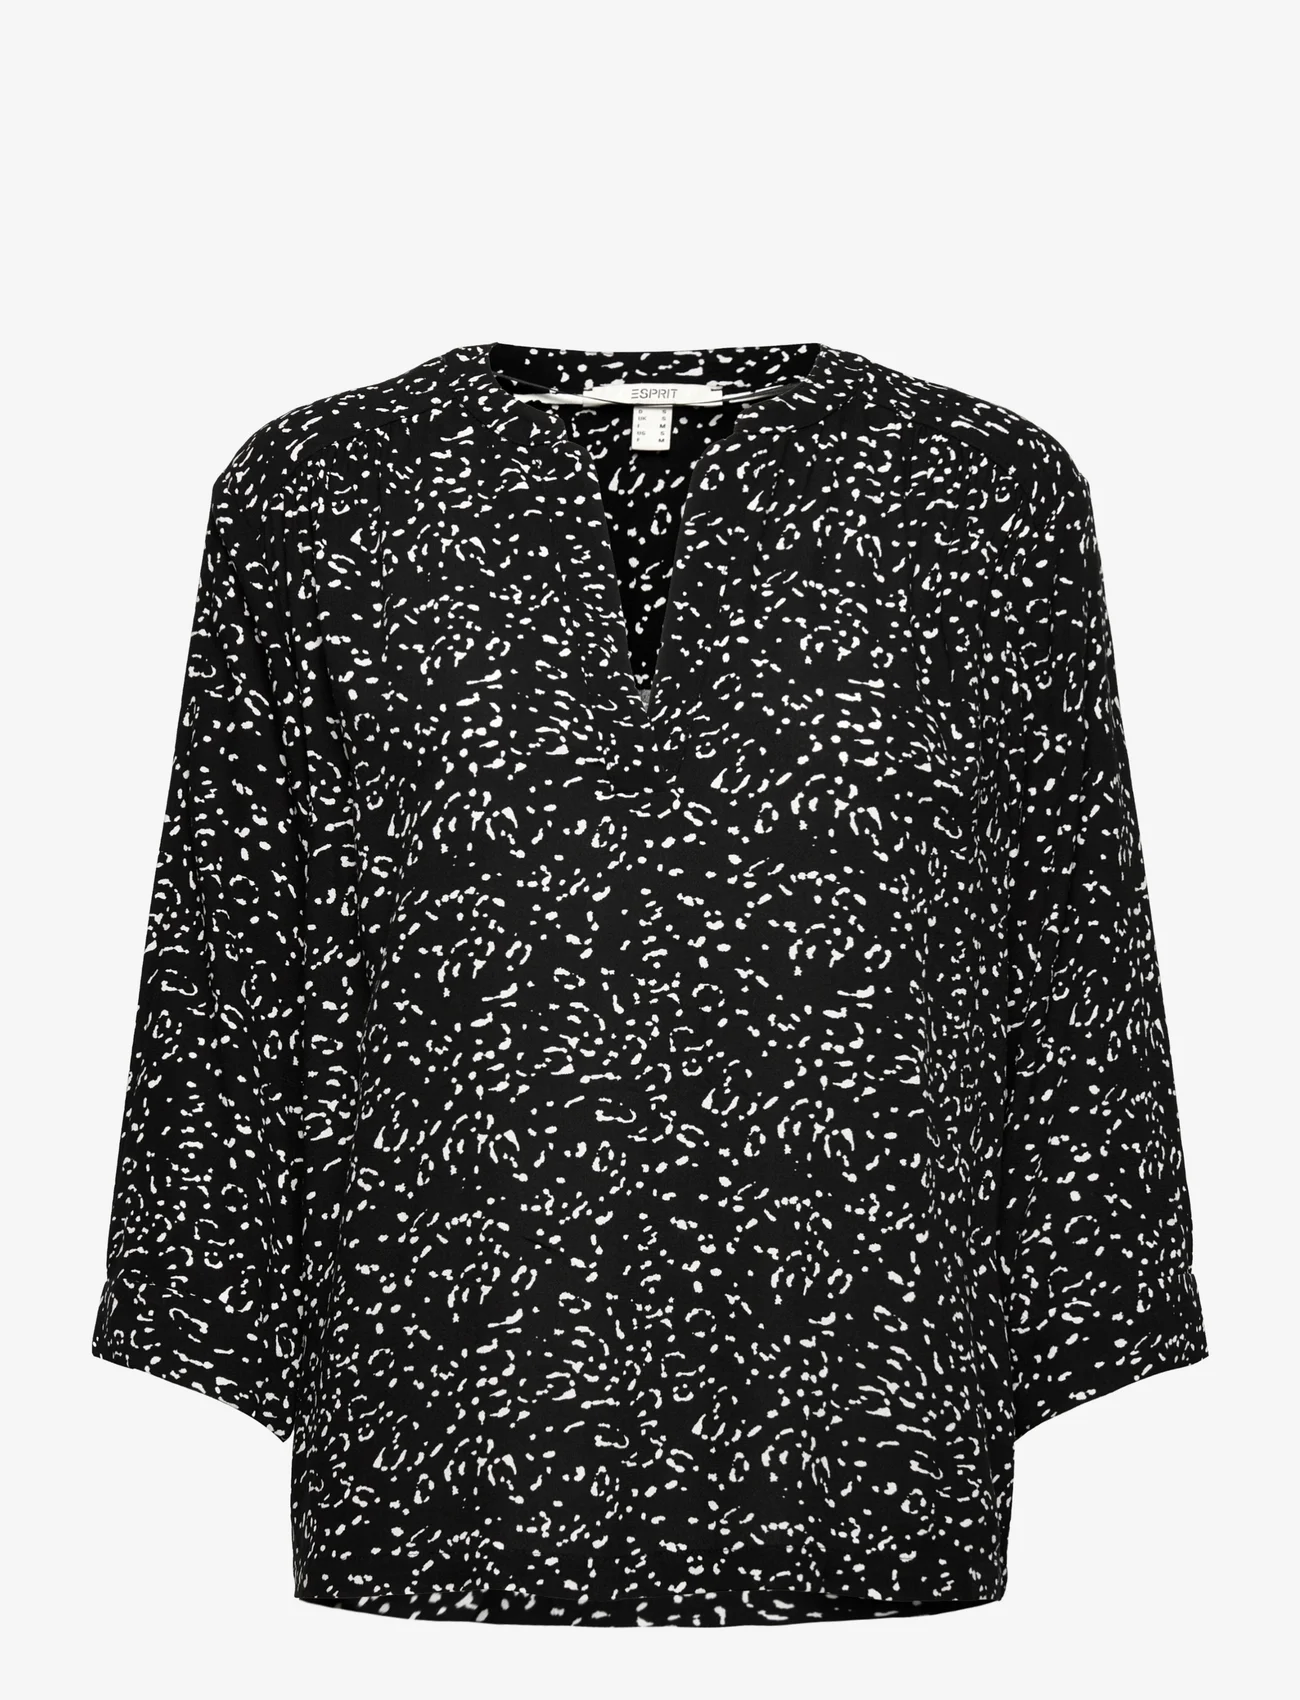 Esprit Casual - Print blouse with LENZING™ ECOVERO™ - long-sleeved blouses - black 4 - 0